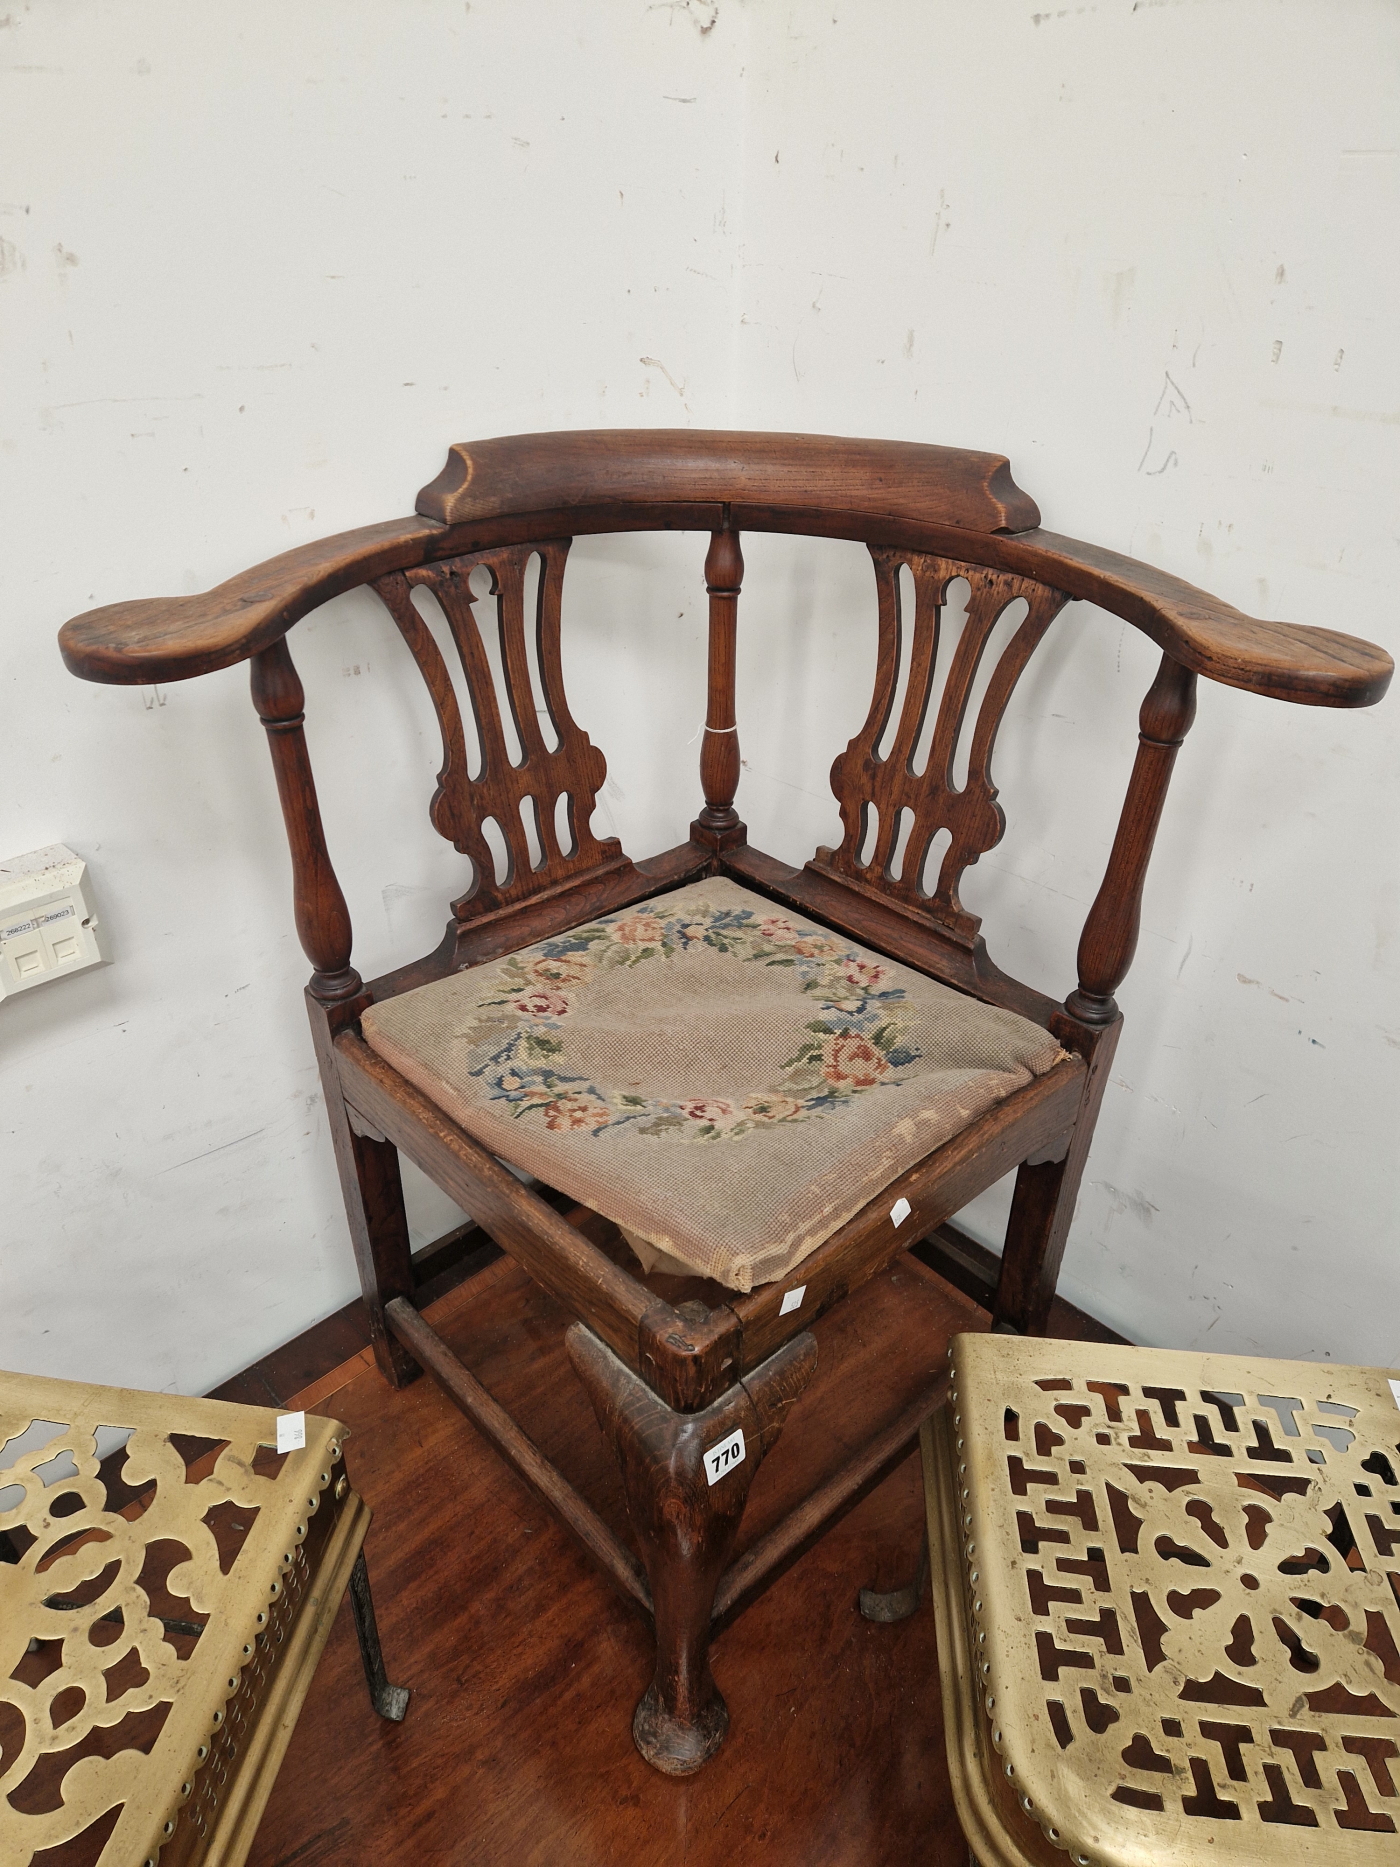 A 19th C. OAK DESK CORNER CHAIR WITH A NEEDLE WORK DROP IN SEAT ABOVE A CABRIOLE FRONT LEG ON PAD - Image 2 of 3